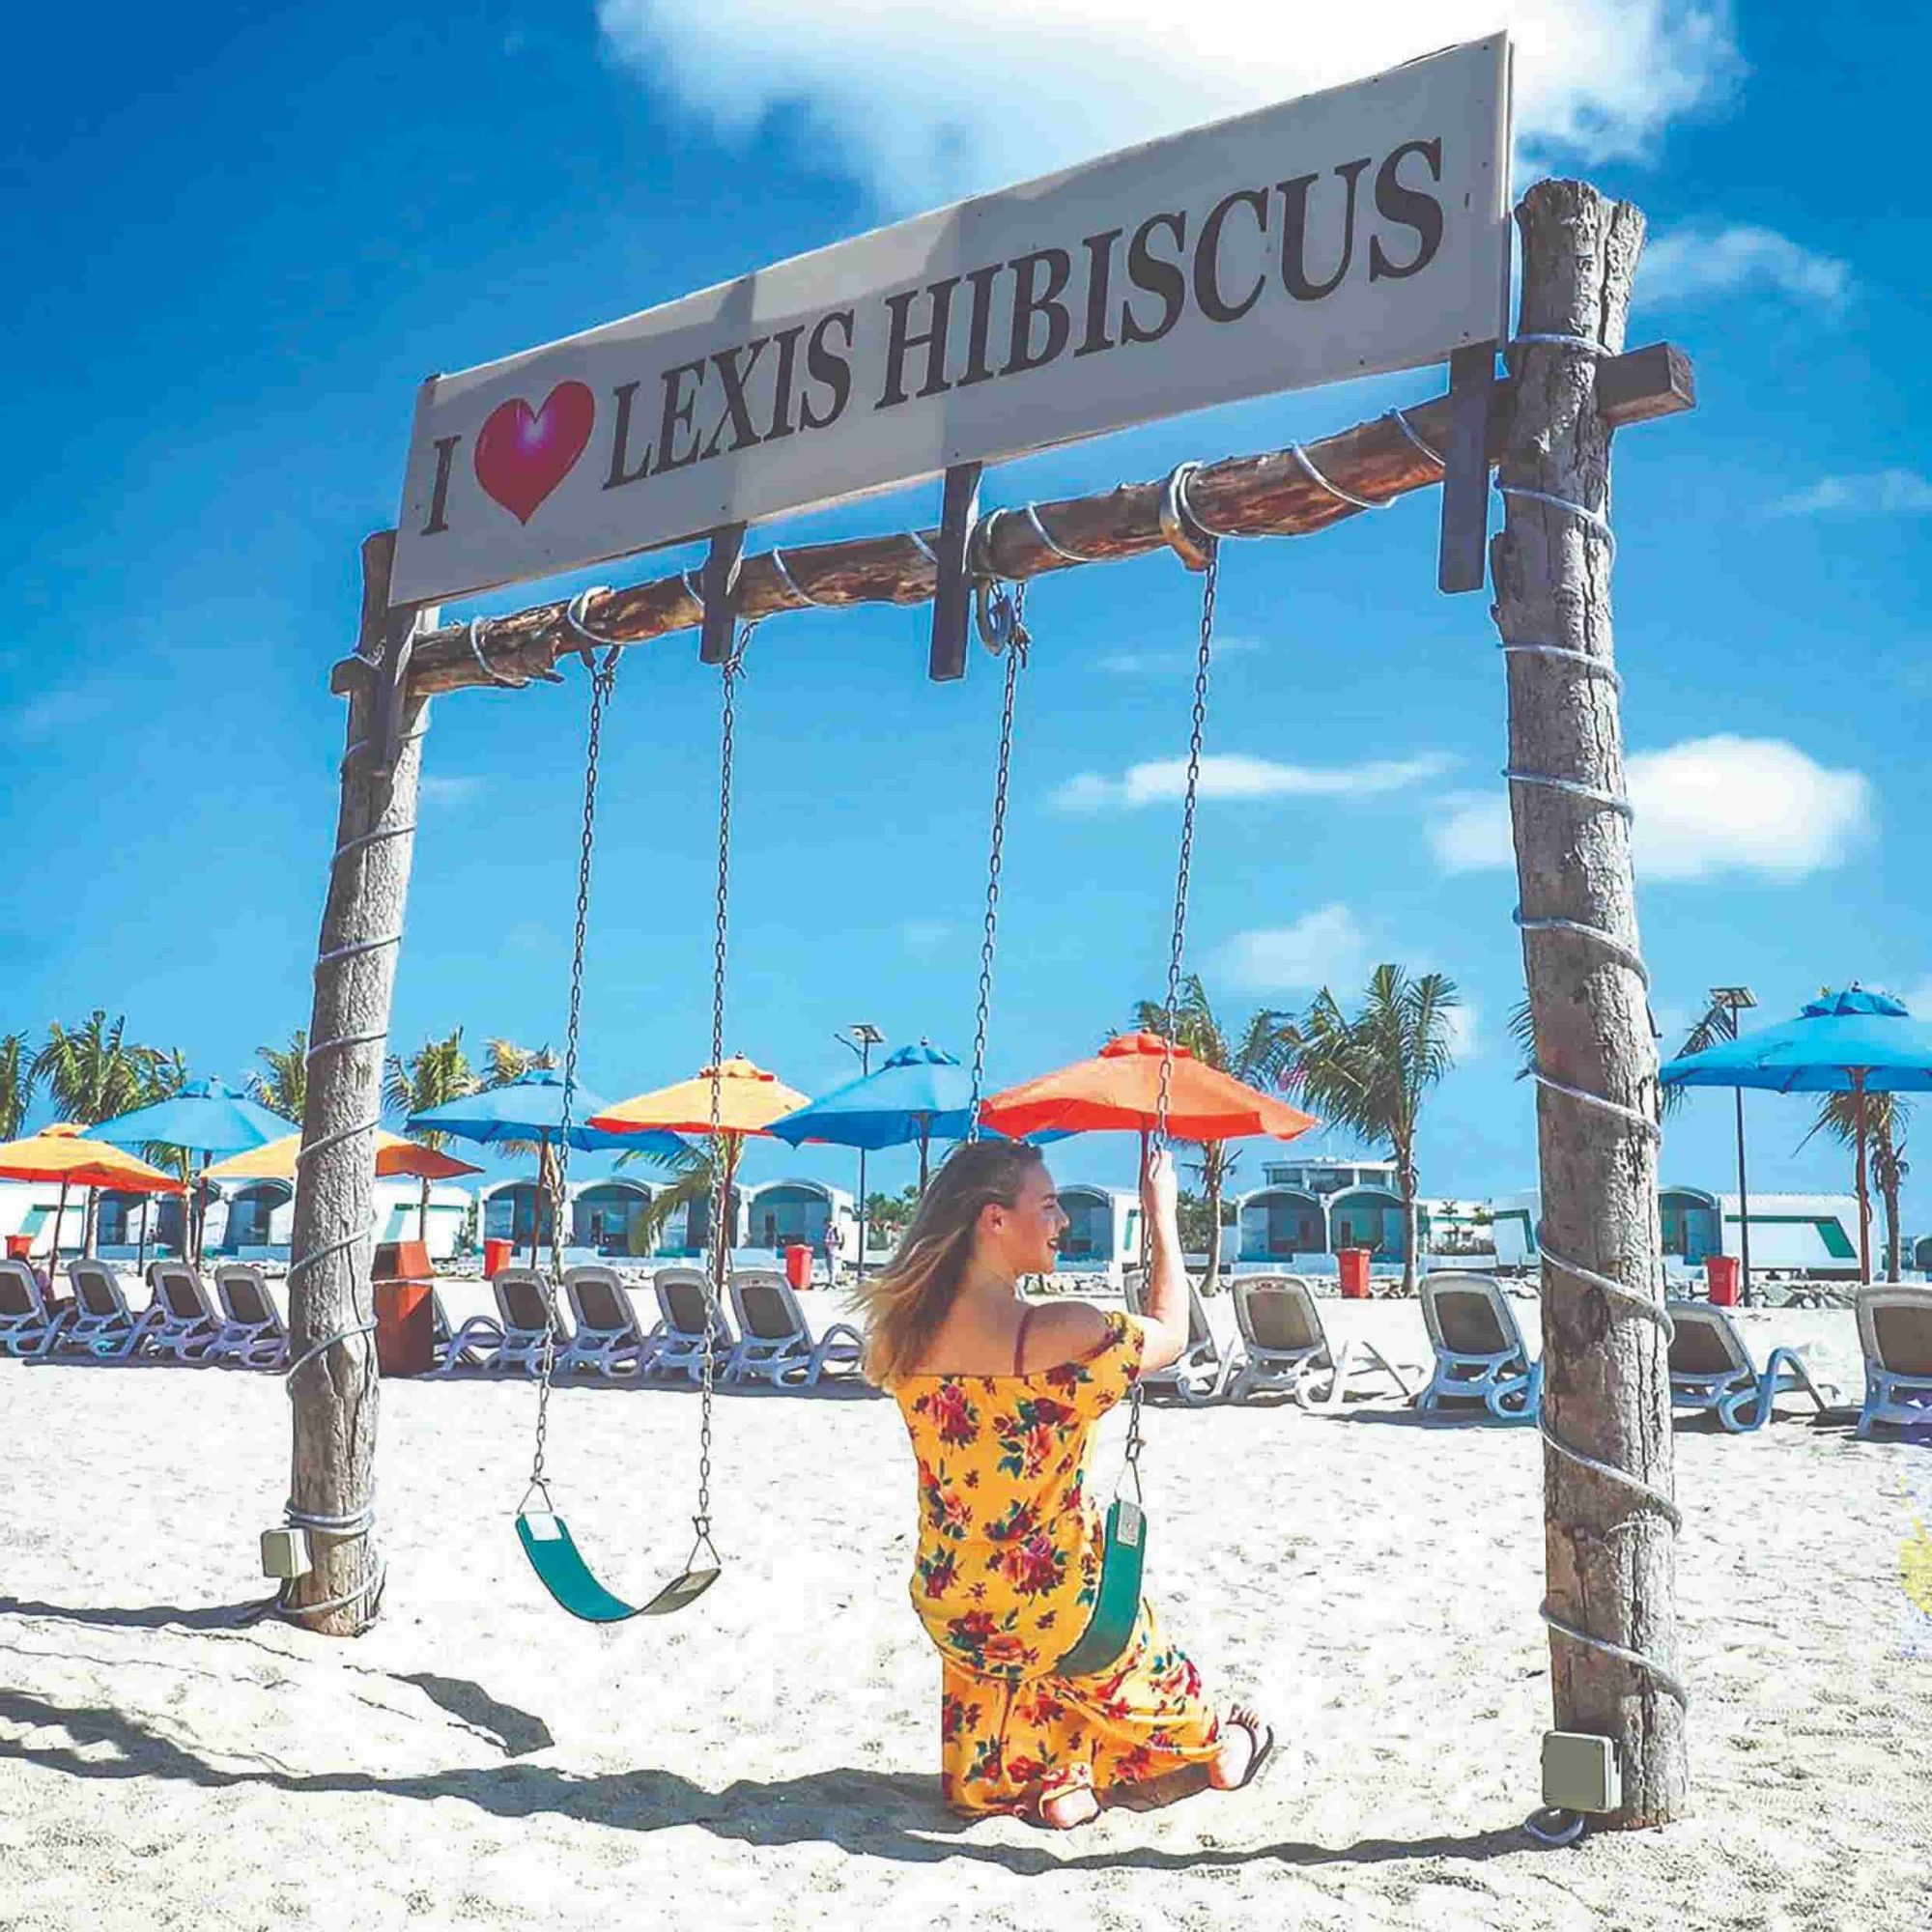 News 2020 - Reviews from The Travel Influencer Community | Lexis Hibiscus® Port Dickson